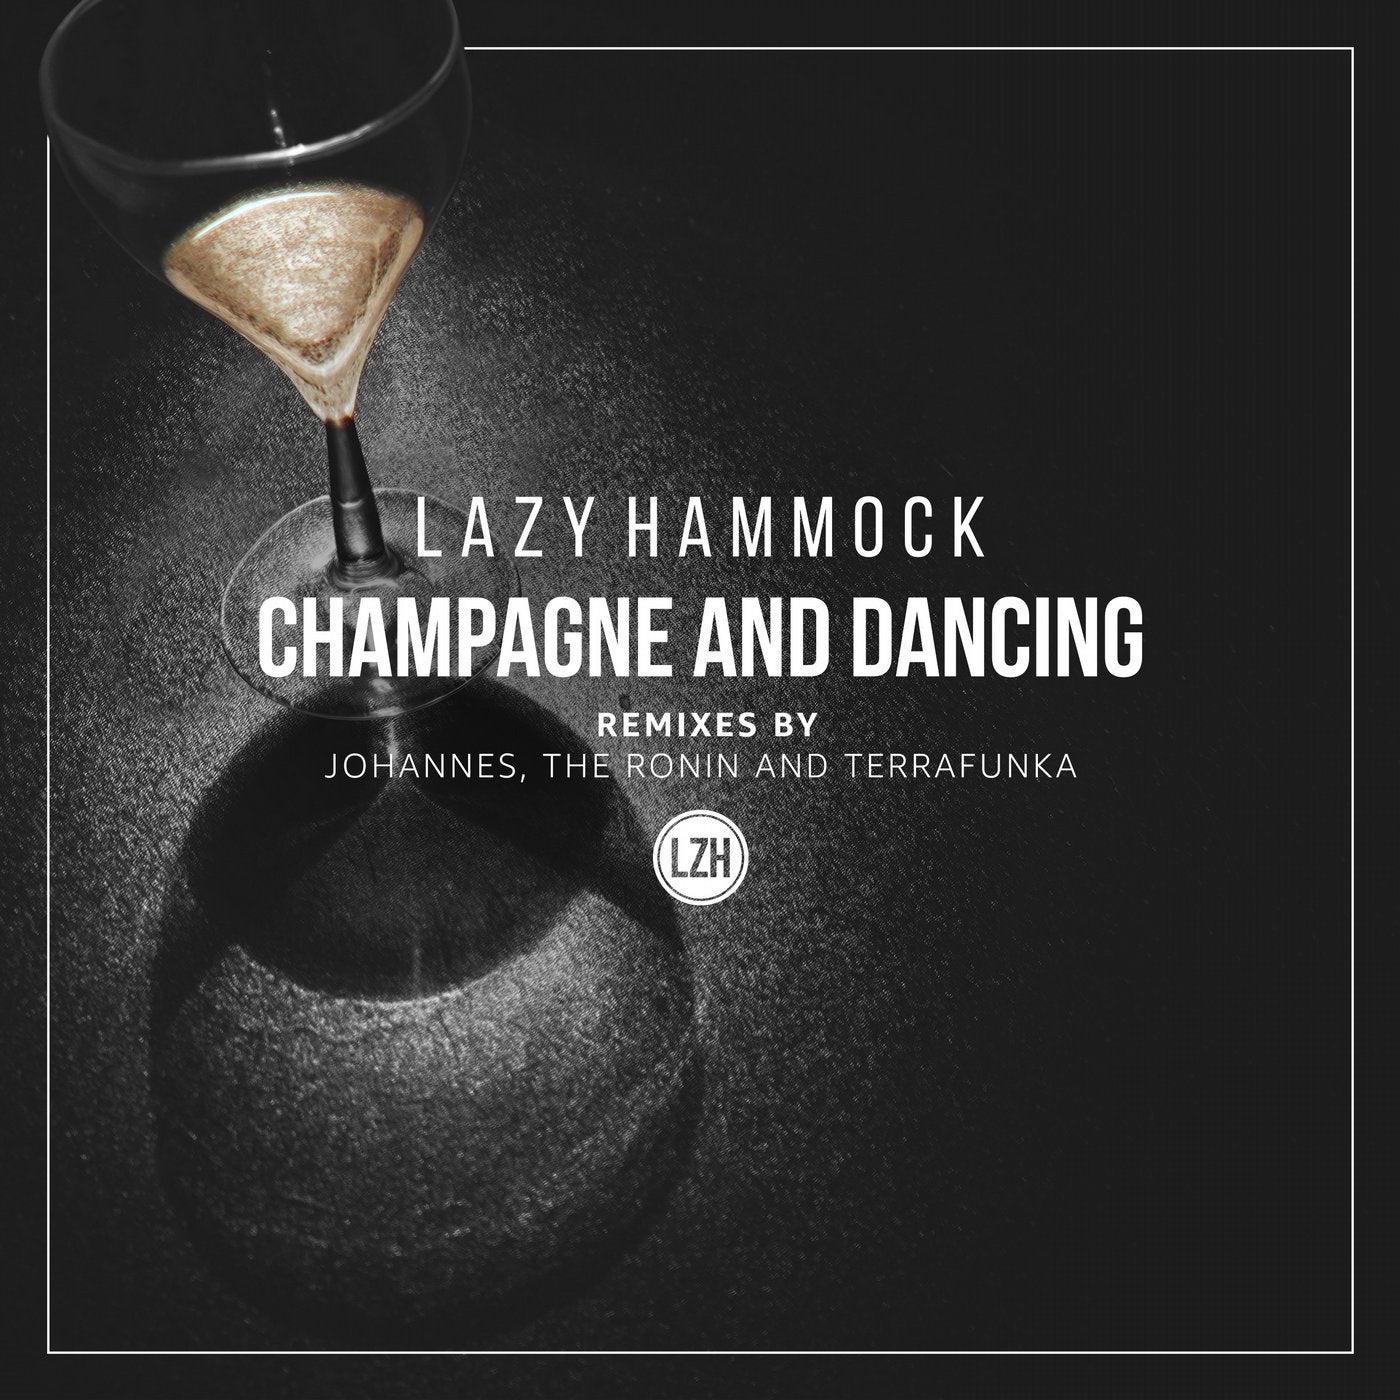 Champagne and Dancing